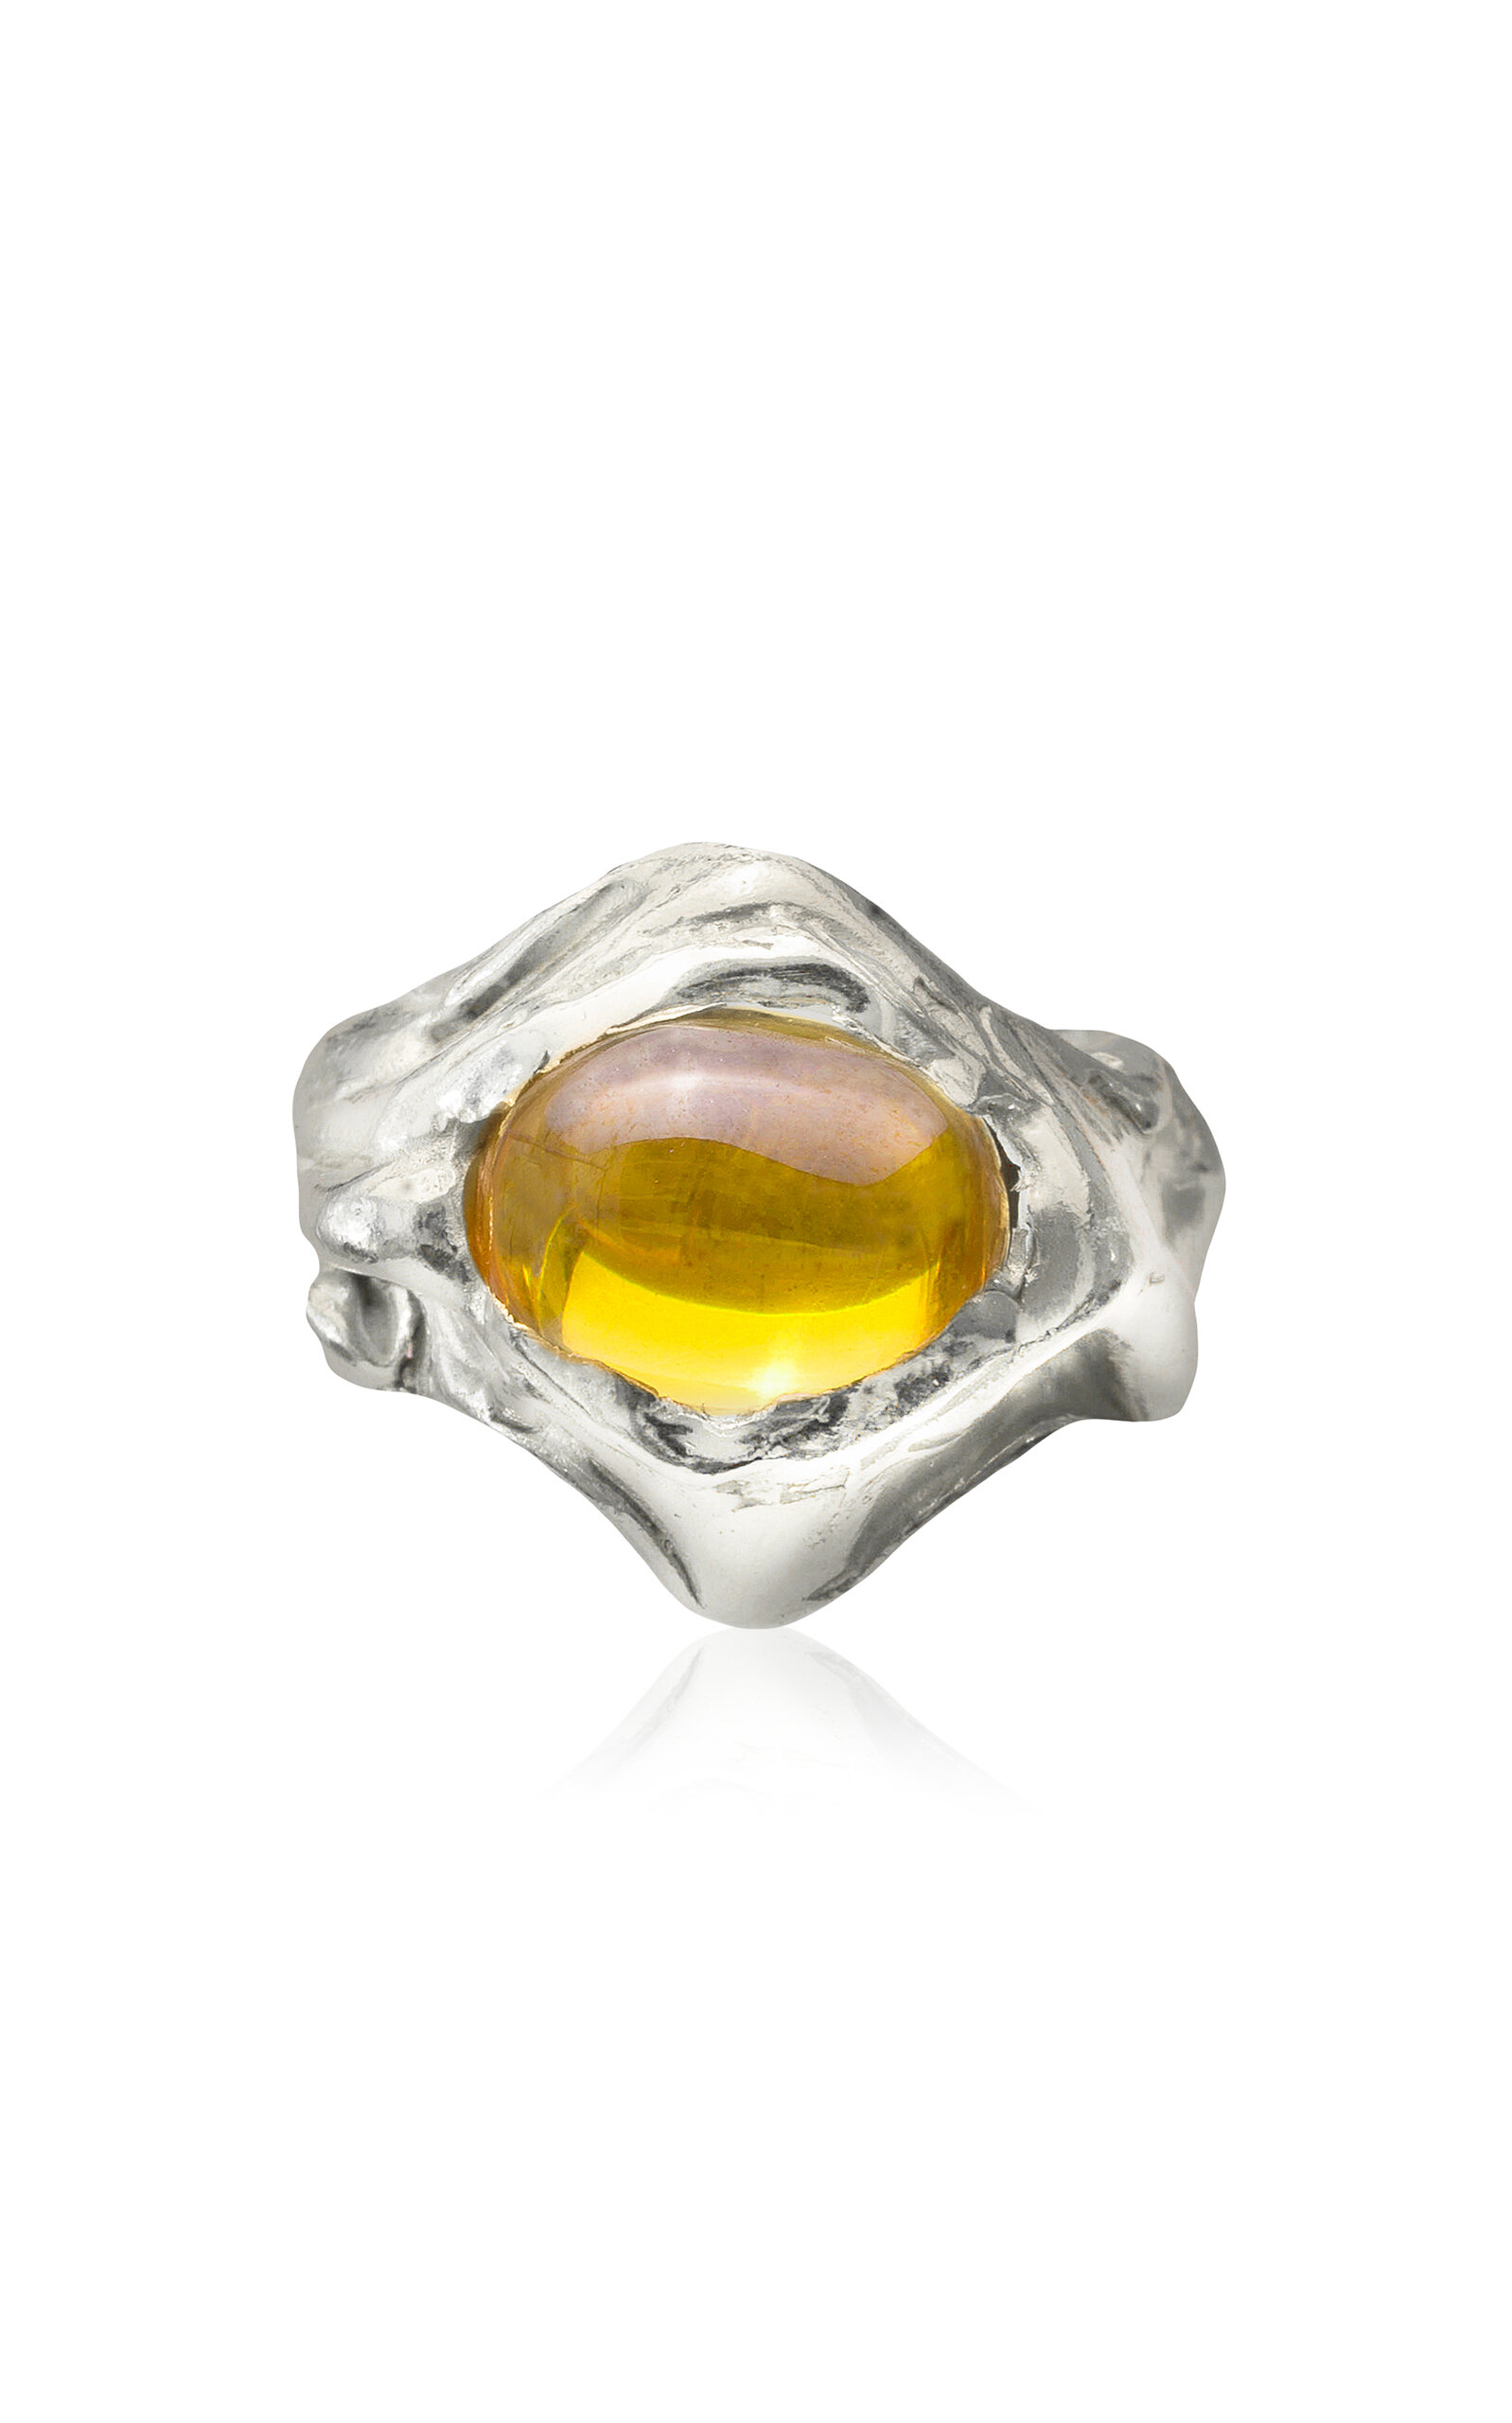 Simuero Manta Sterling Silver Ring In Yellow